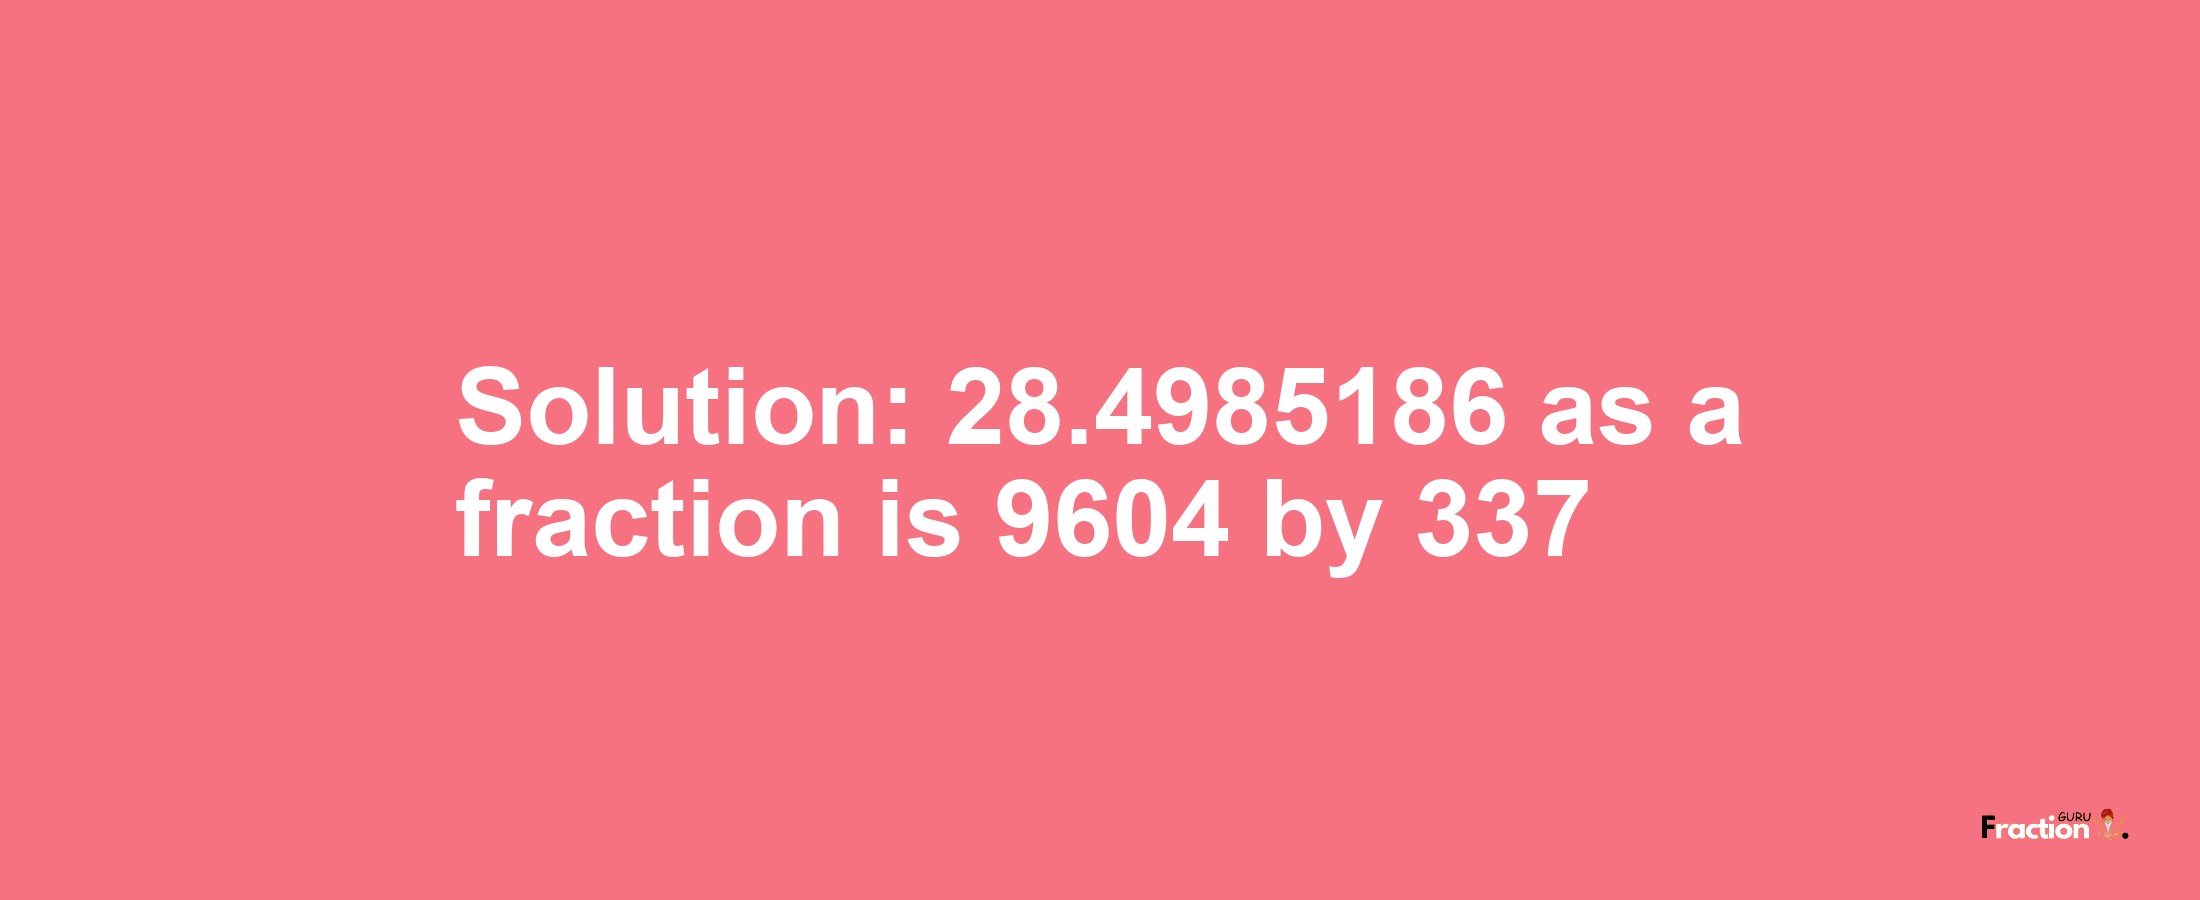 Solution:28.4985186 as a fraction is 9604/337